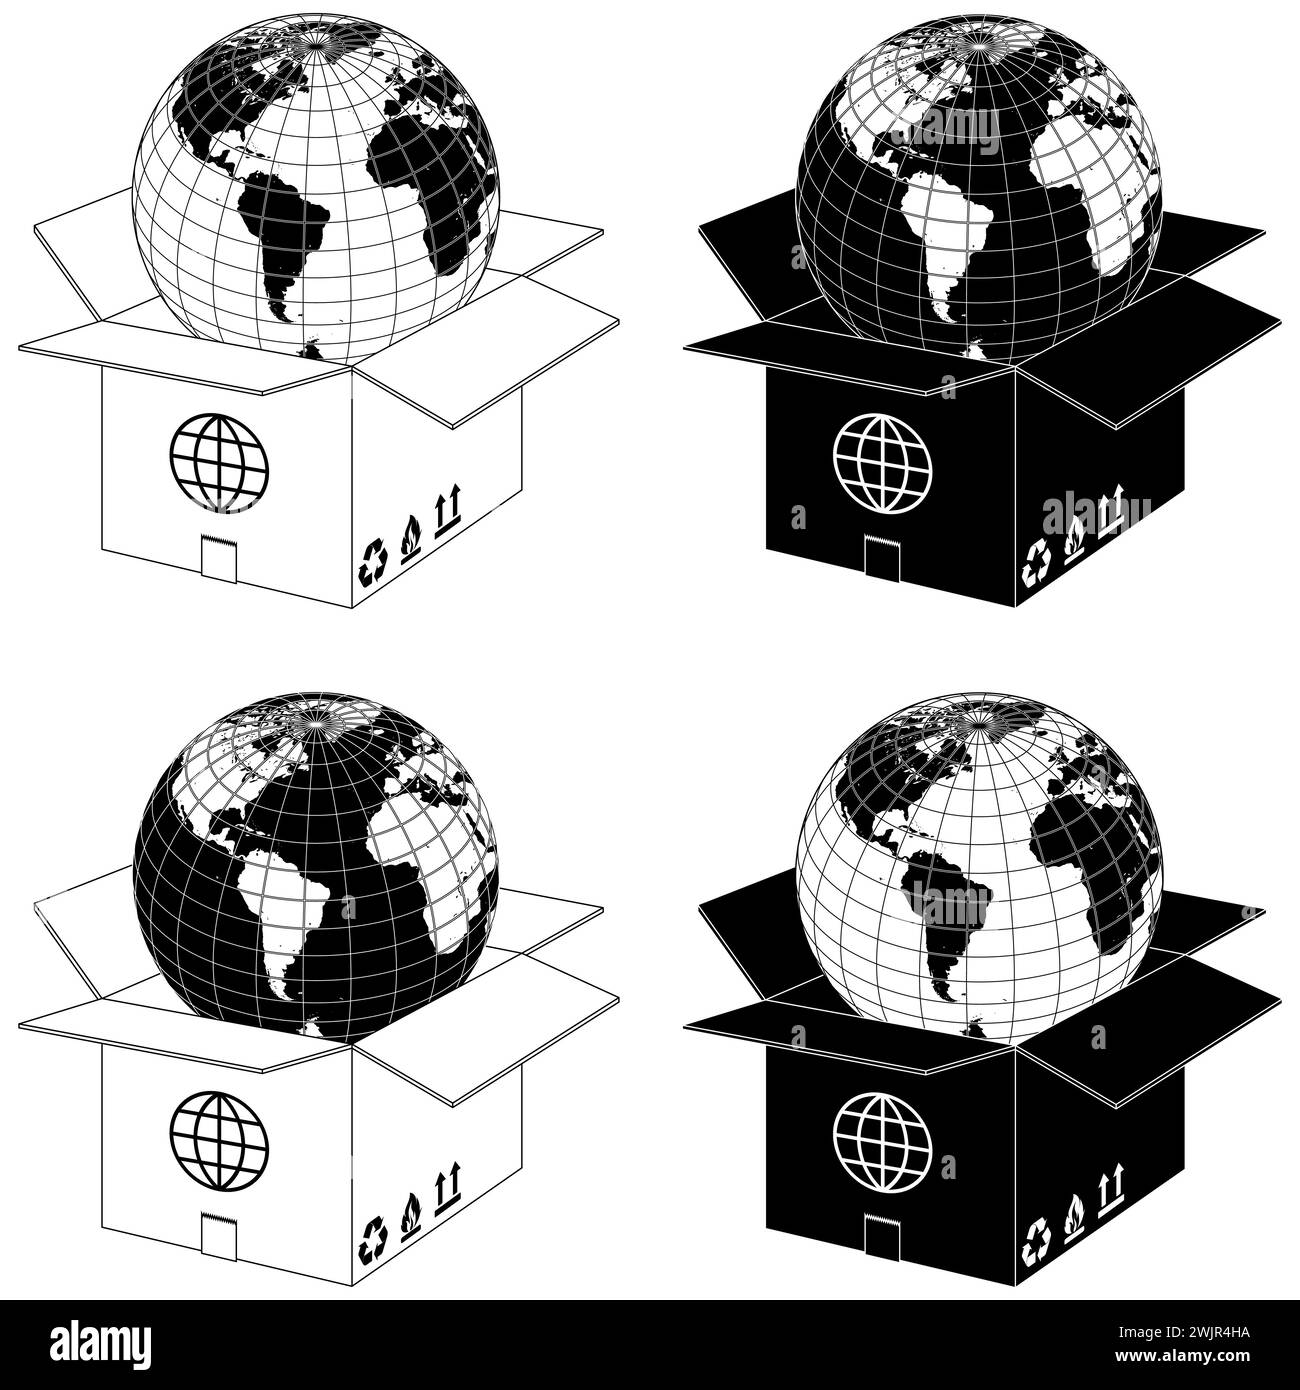 Vector design planet earth coming out of a cardboard box, worldwide shipping box design Stock Vector